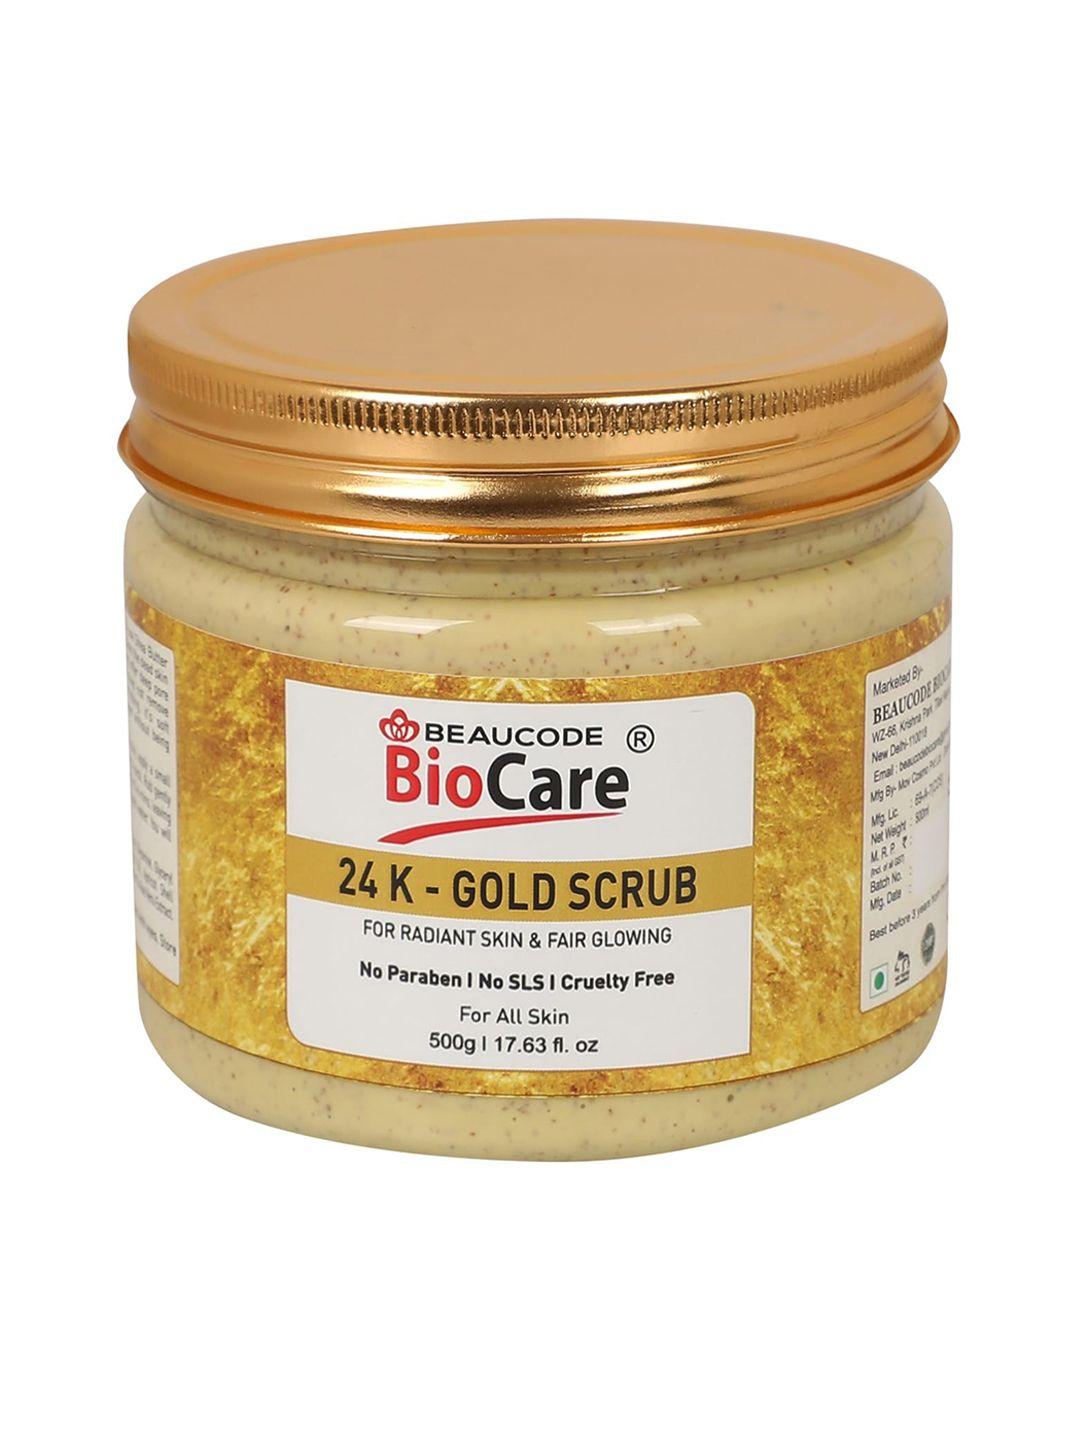 beaucode biocare 24k-gold face scrub for radiant & glowing skin - 500 g